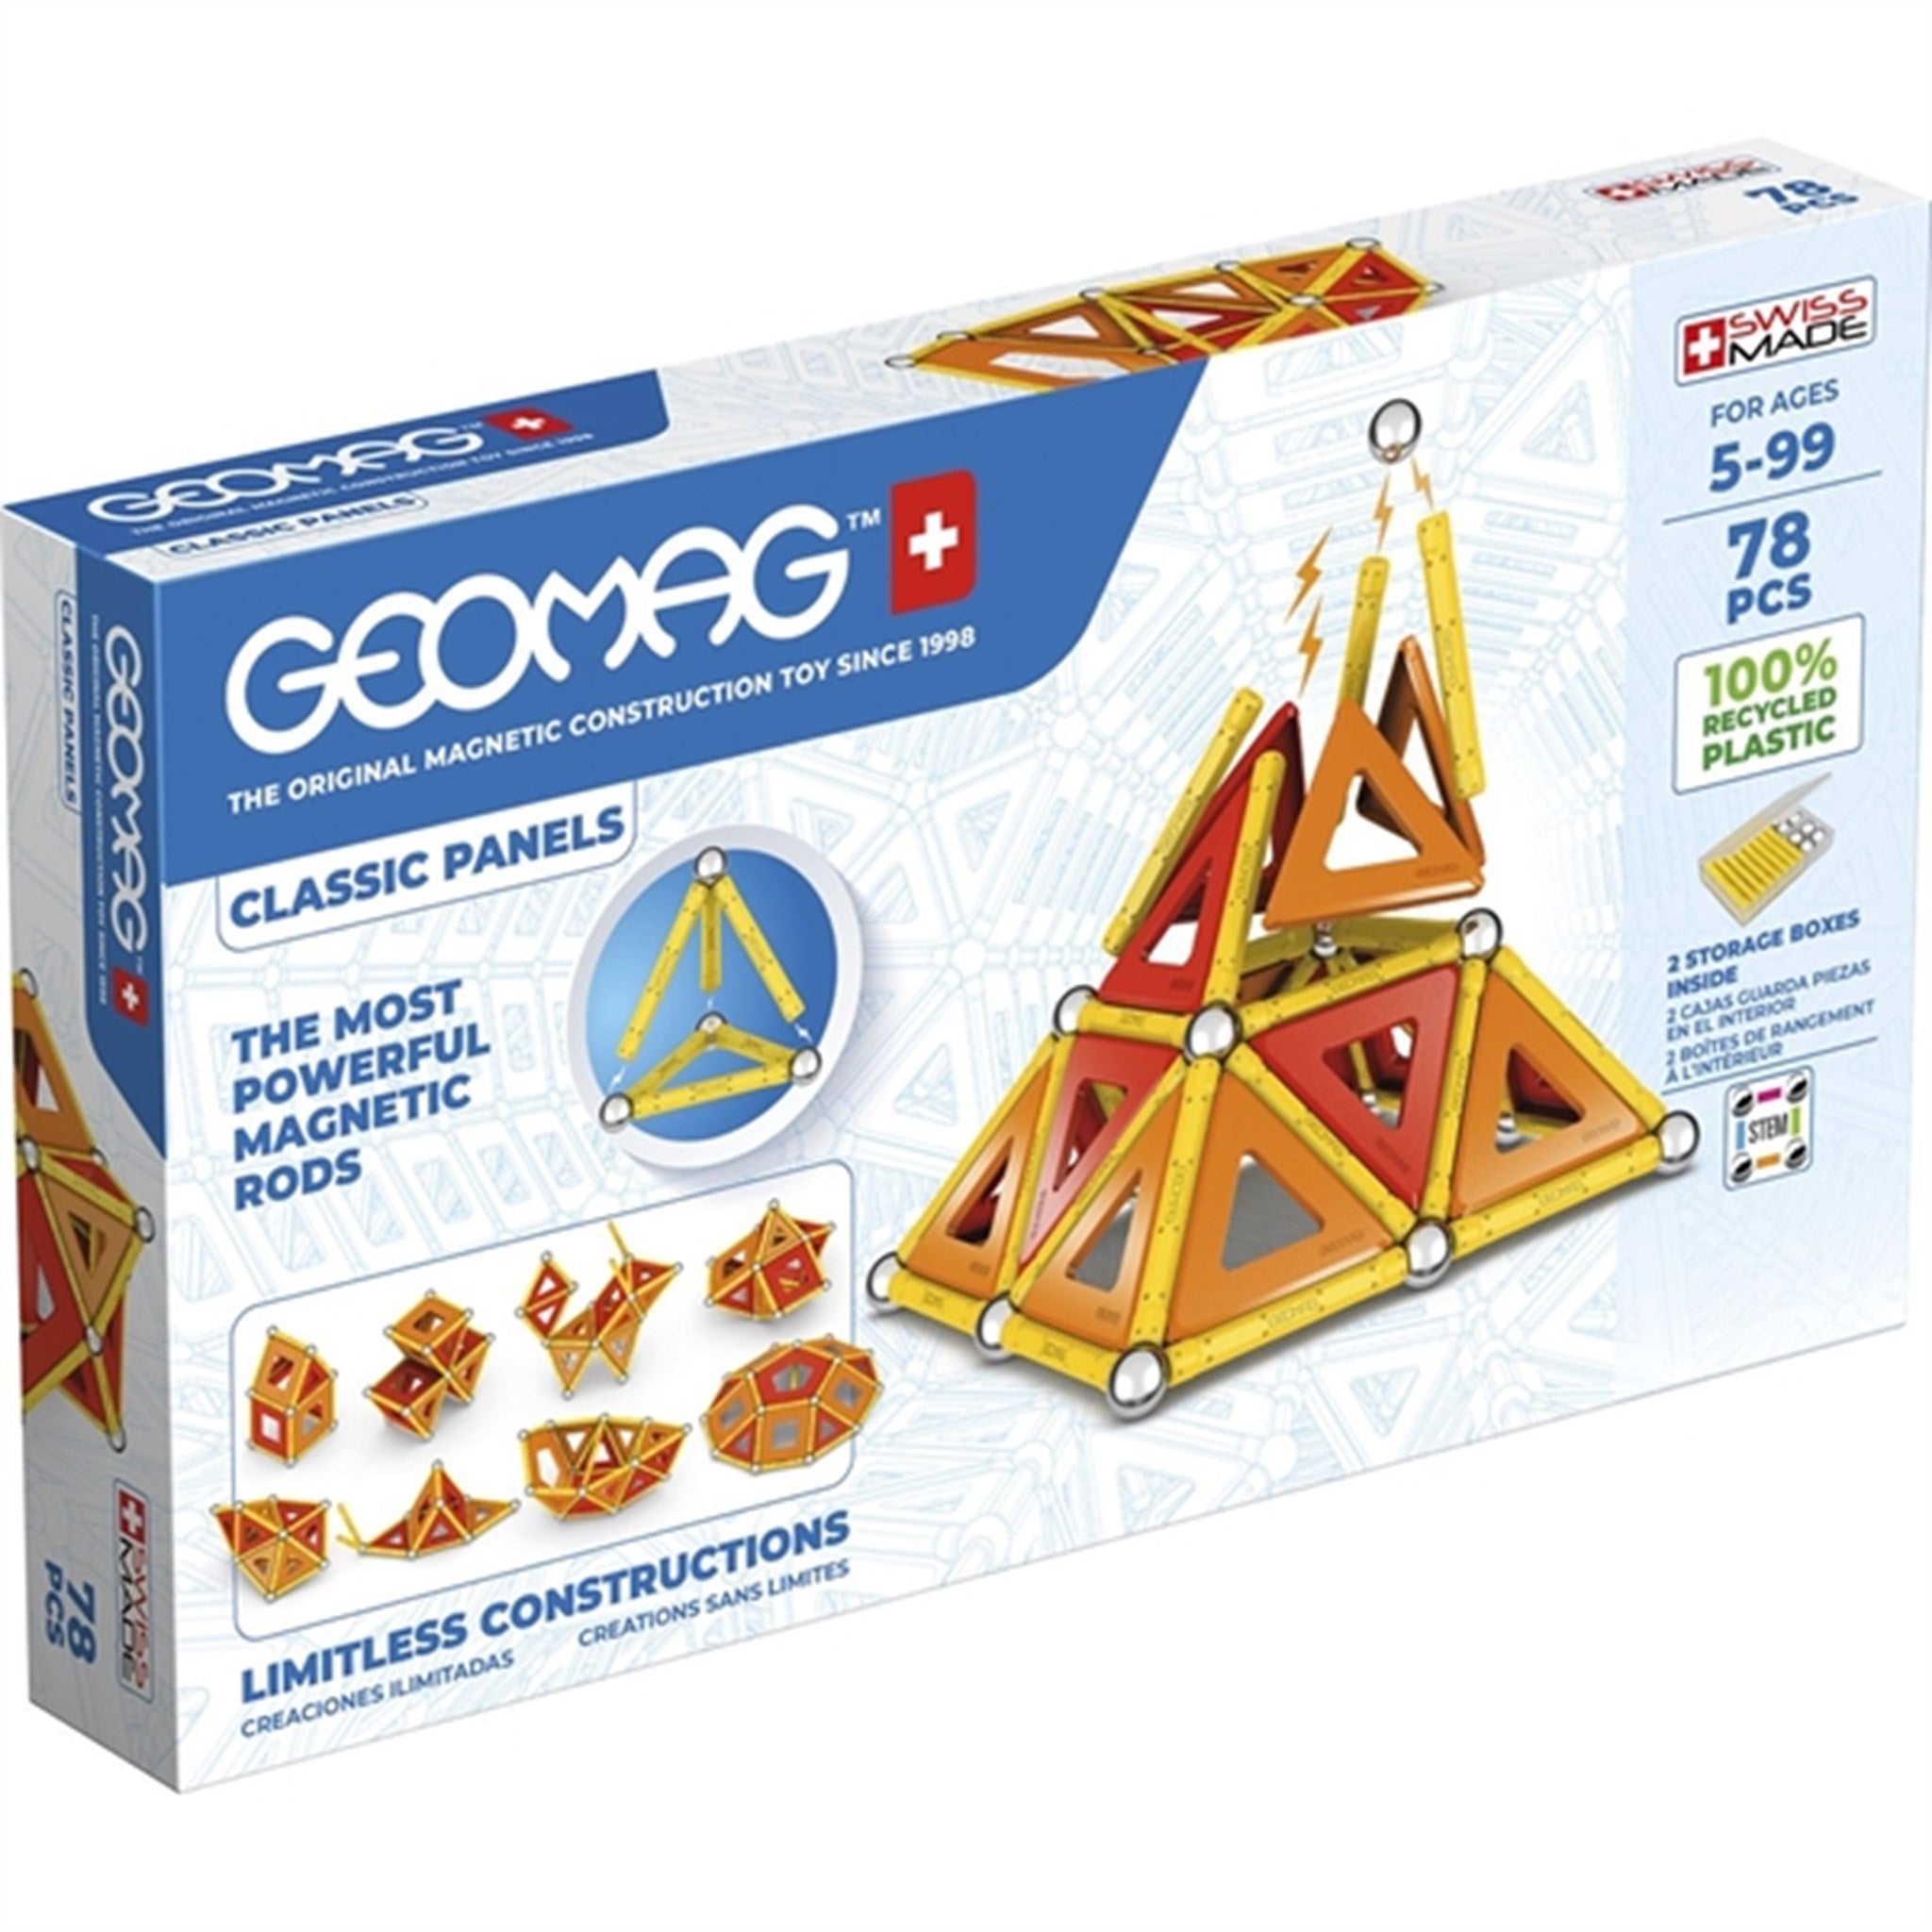 Geomag Classic Panels Recycled 78 stk